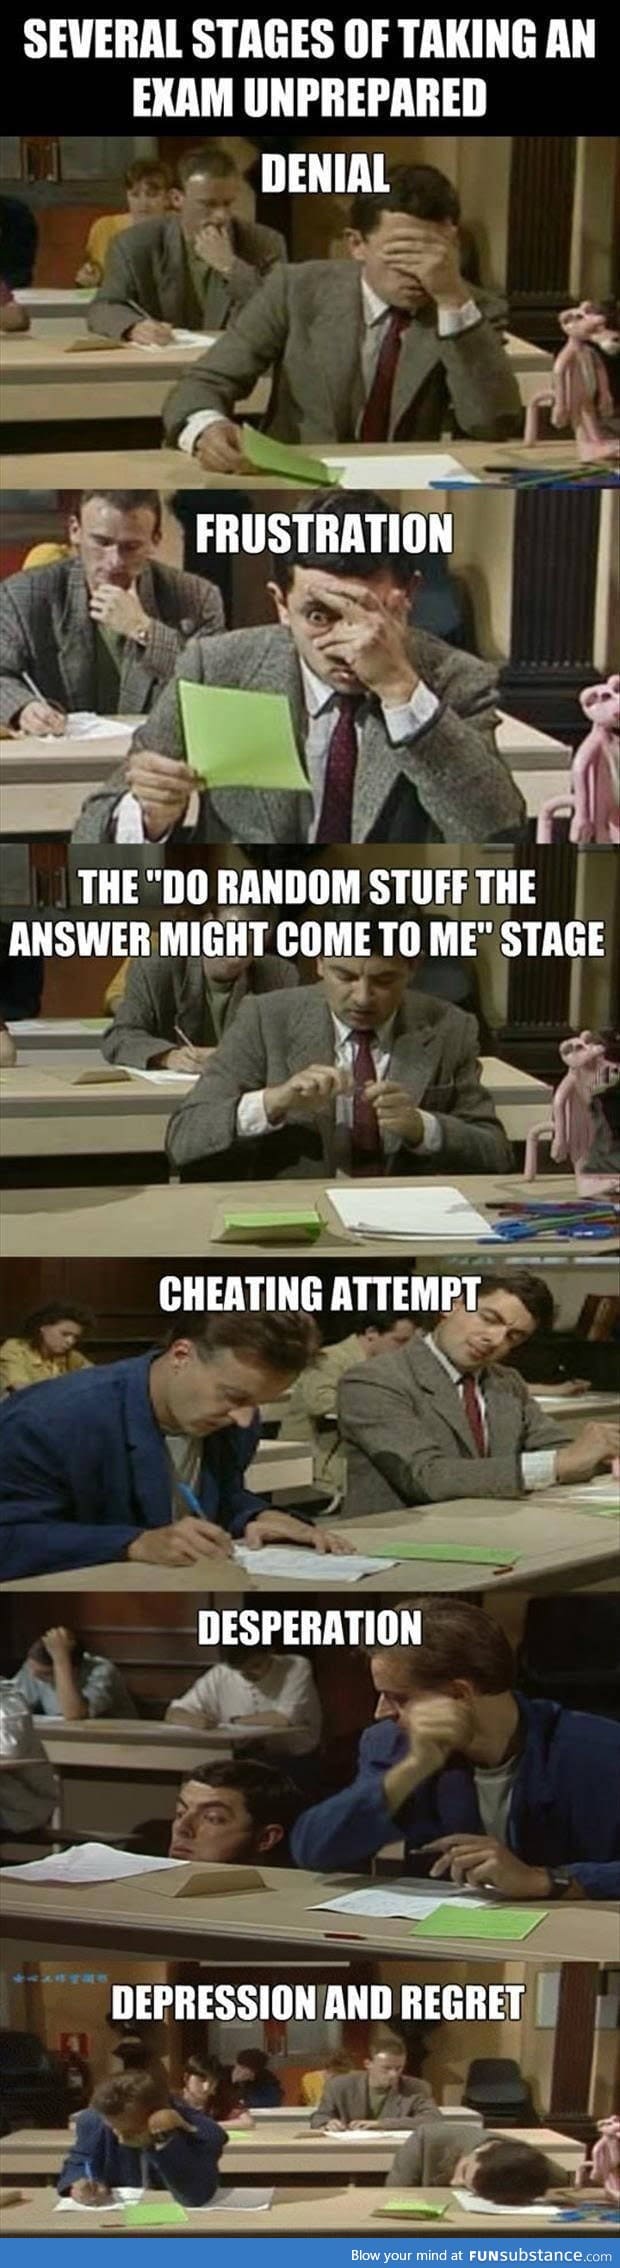 My term finals in a nutshell